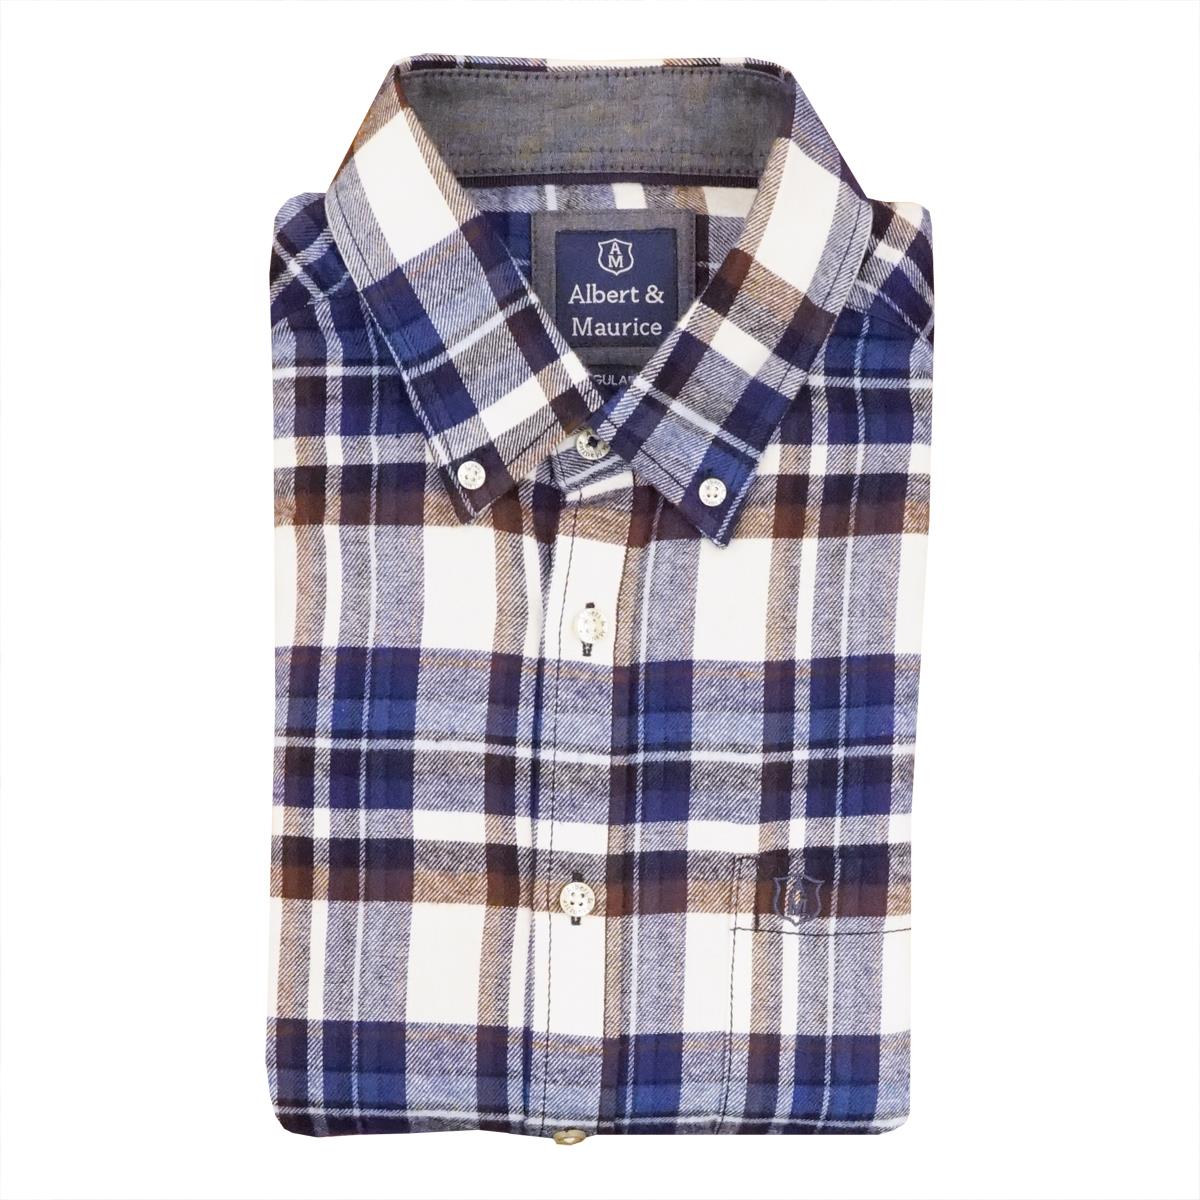 Albert and Maurice Checkley Flannel Shirt Questions & Answers